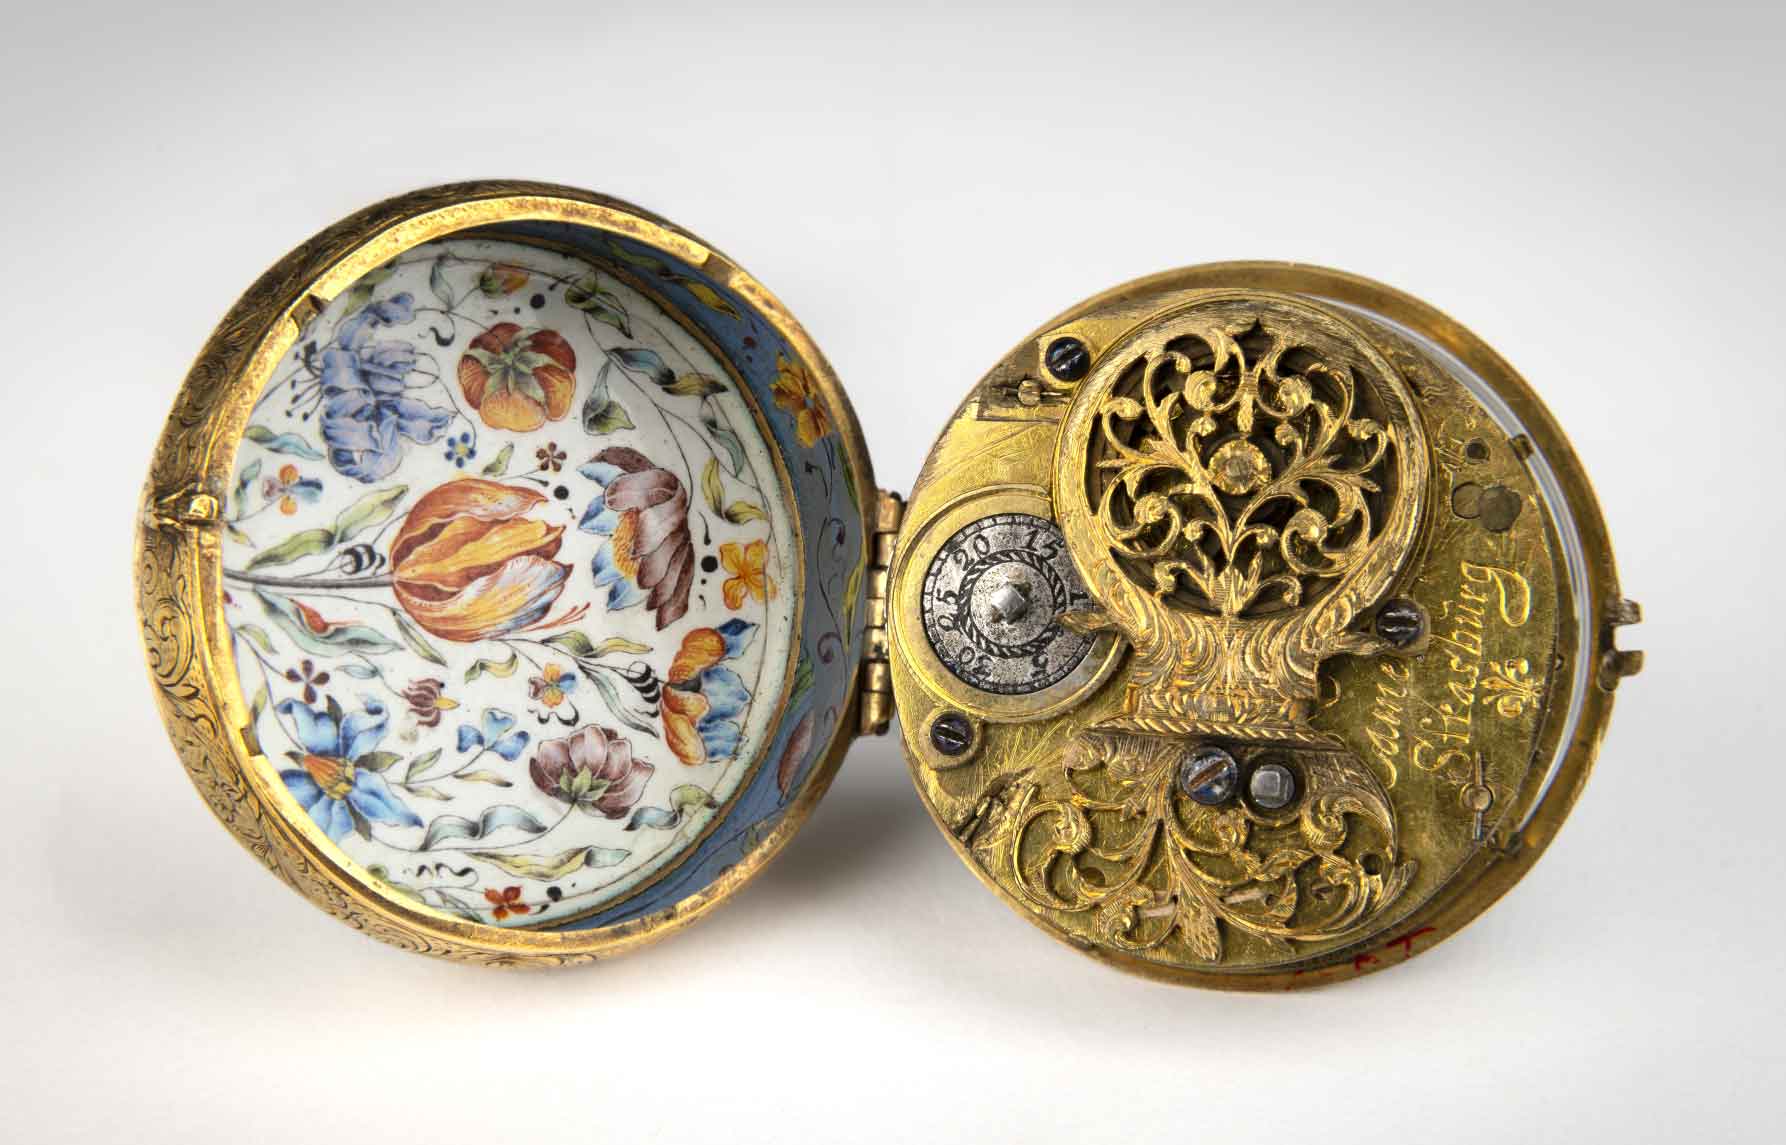 Caspar Cameel (French, active from about 1625), watchmaker, Watch with the Judgment of Paris, about 1640, with early- to mid-17th-century movement (Strasbourg, France), probably Blois, France, enamel on copper with brass band, gilded metal hand, and modern crystal. Taft Museum of Art, 1932.64